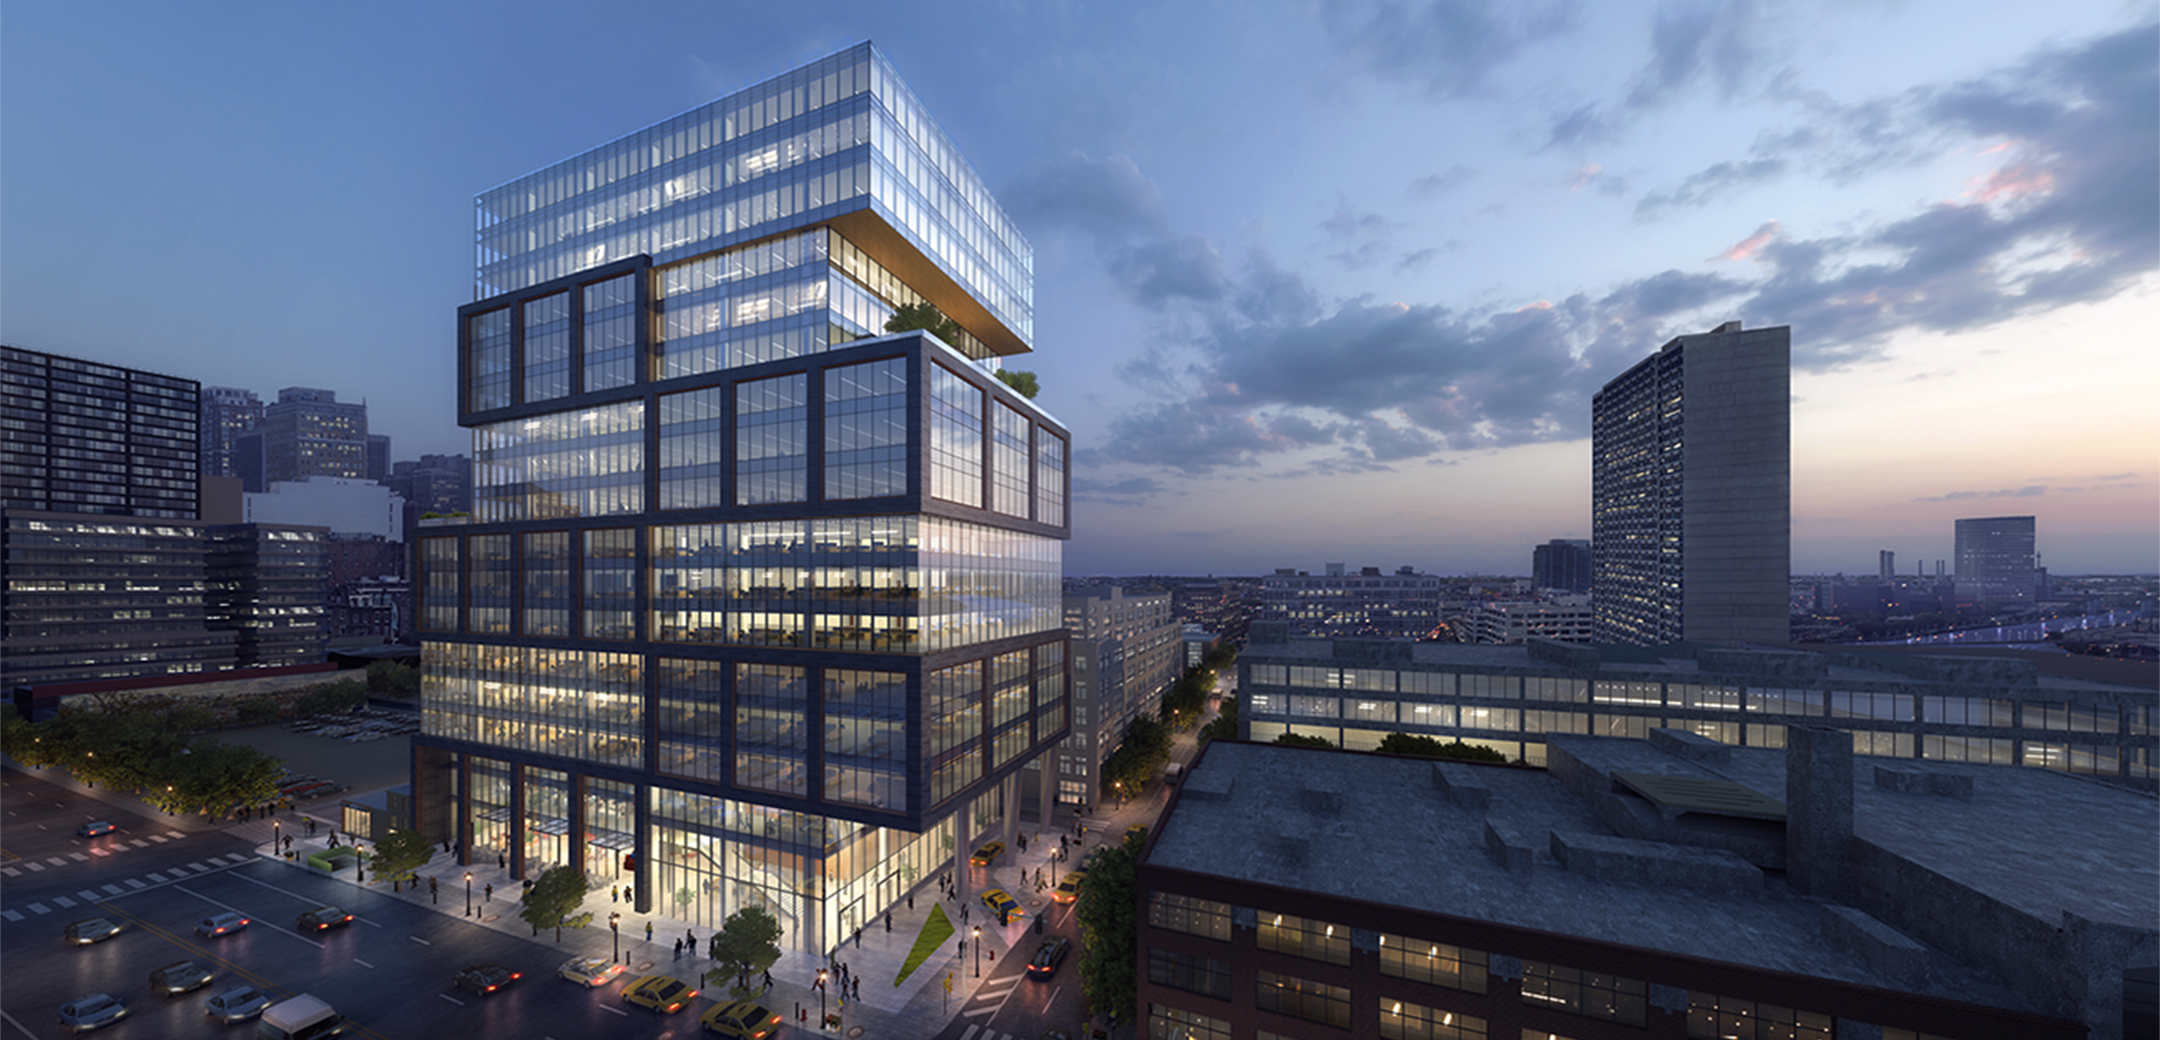 A nighttime exterior rendering of Parkway Corporation's commercial high rise building off-set on a busy downtown Philadelphia street.